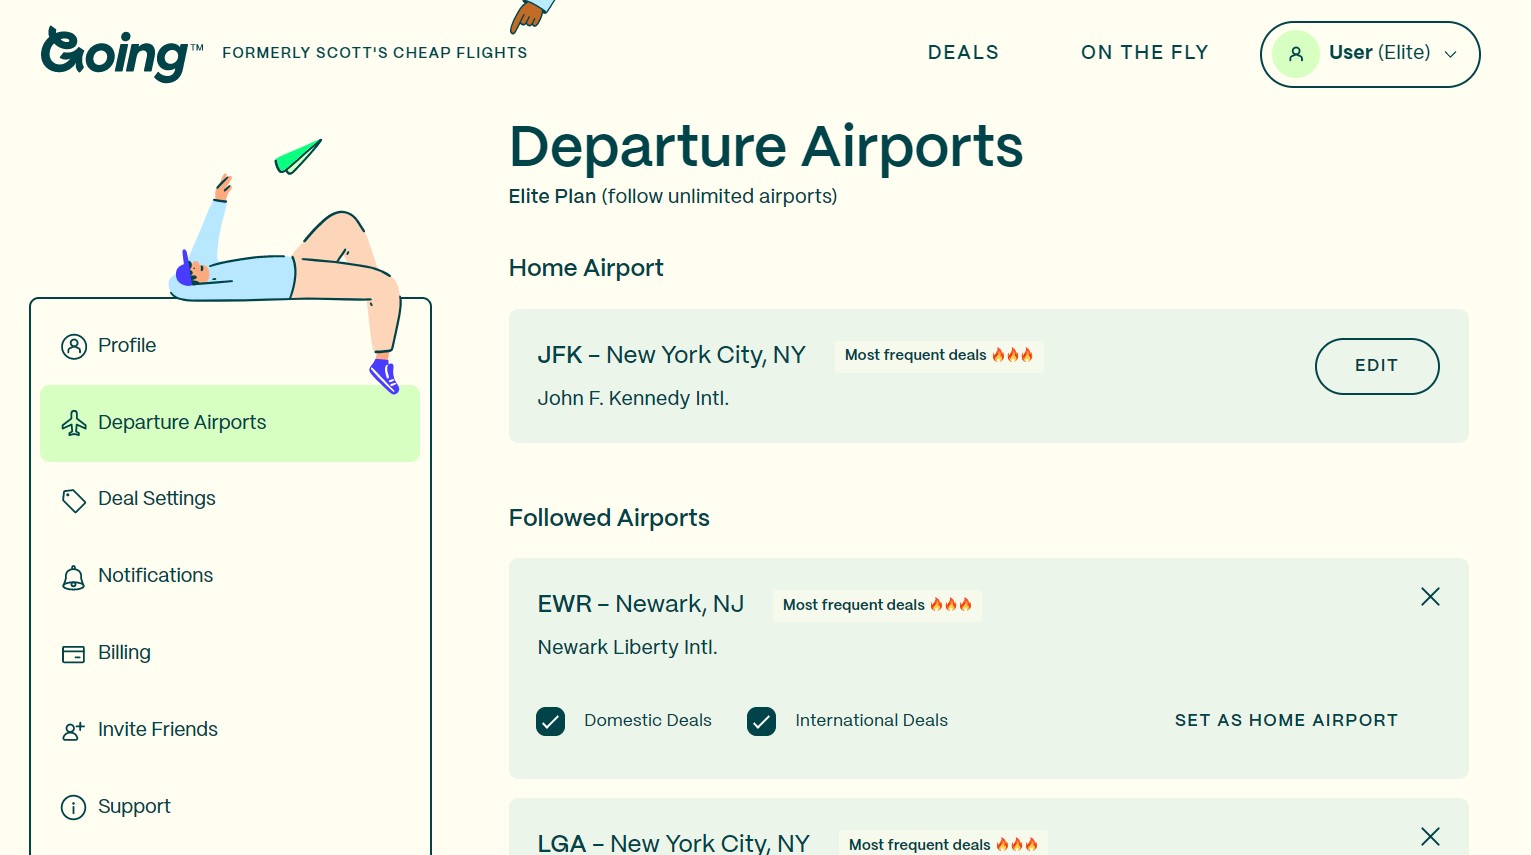 A screenshot of the Going travel website showing JFK and Newark chosen as home departure airports